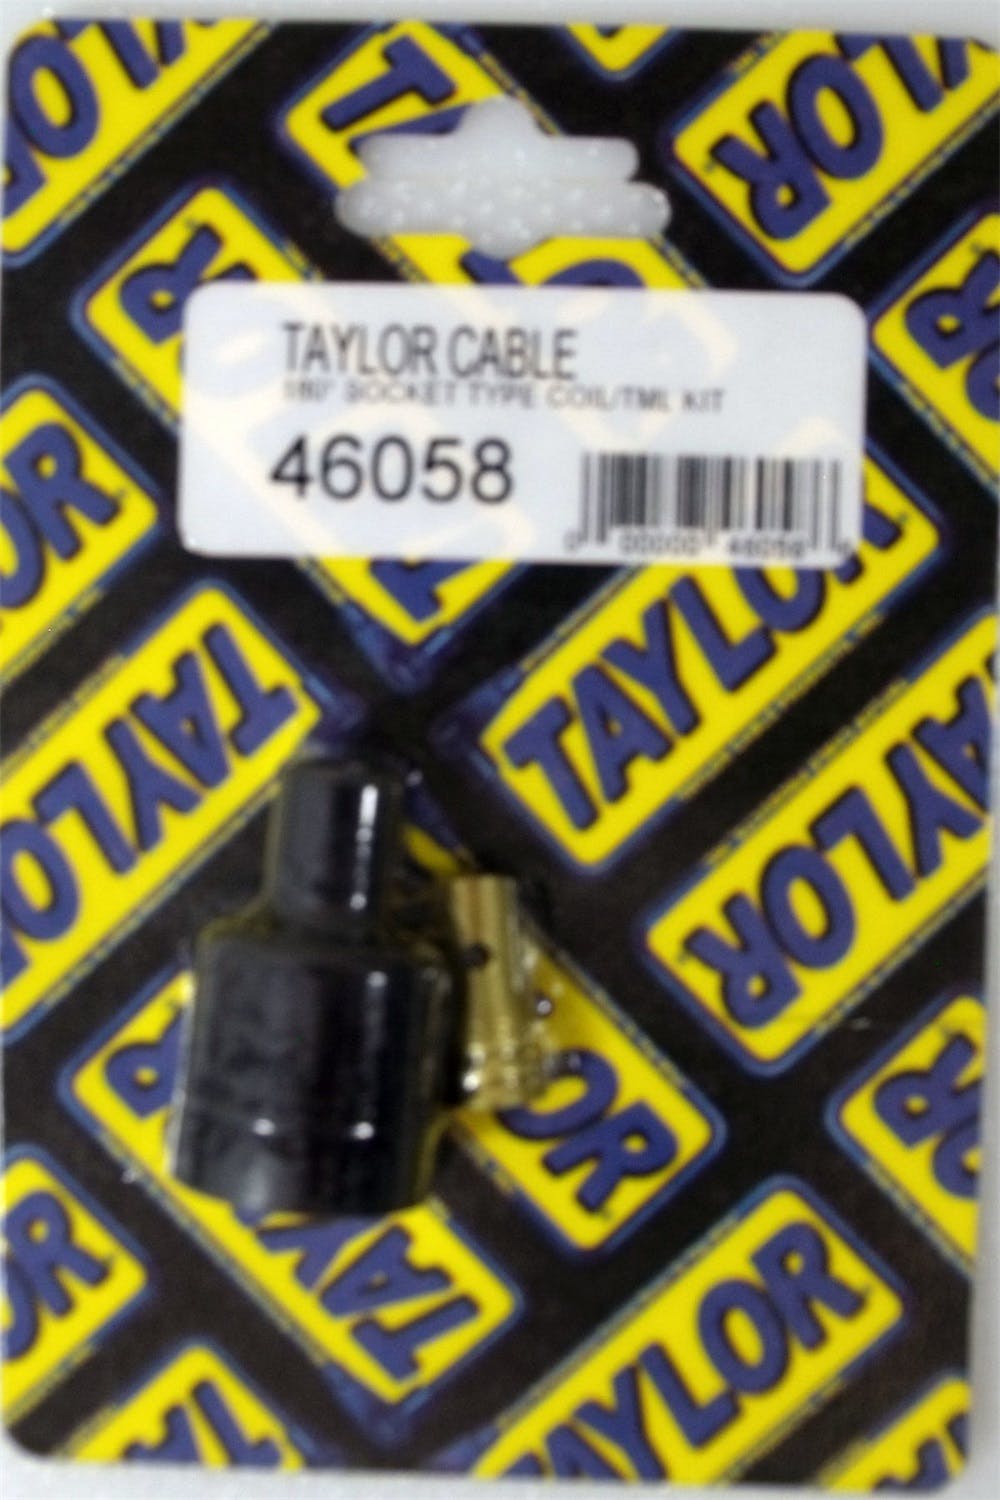 Taylor Cable Products 46058 Socket Type Coil/Tml Kit 180 deg